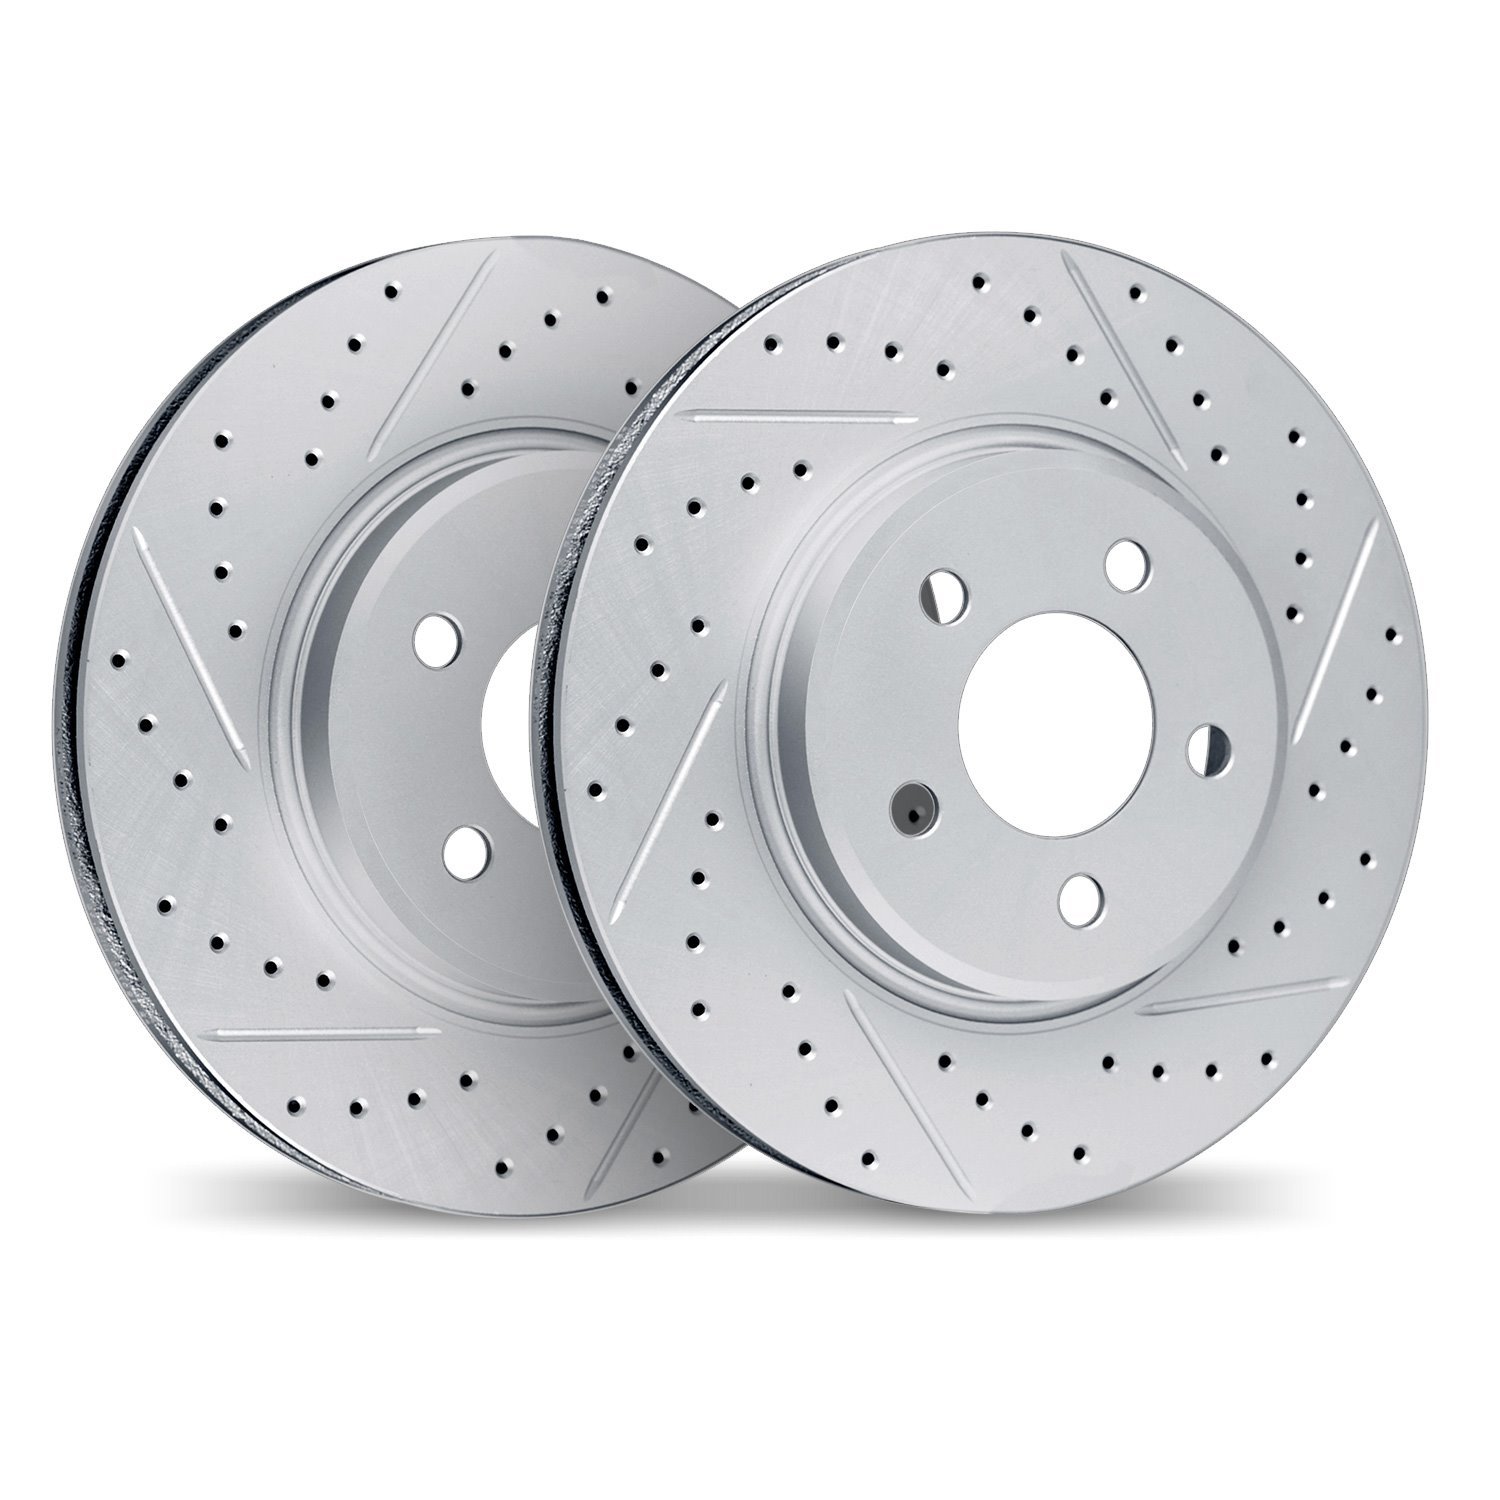 2002-31101 Geoperformance Drilled/Slotted Brake Rotors, 2011-2016 BMW, Position: Rear